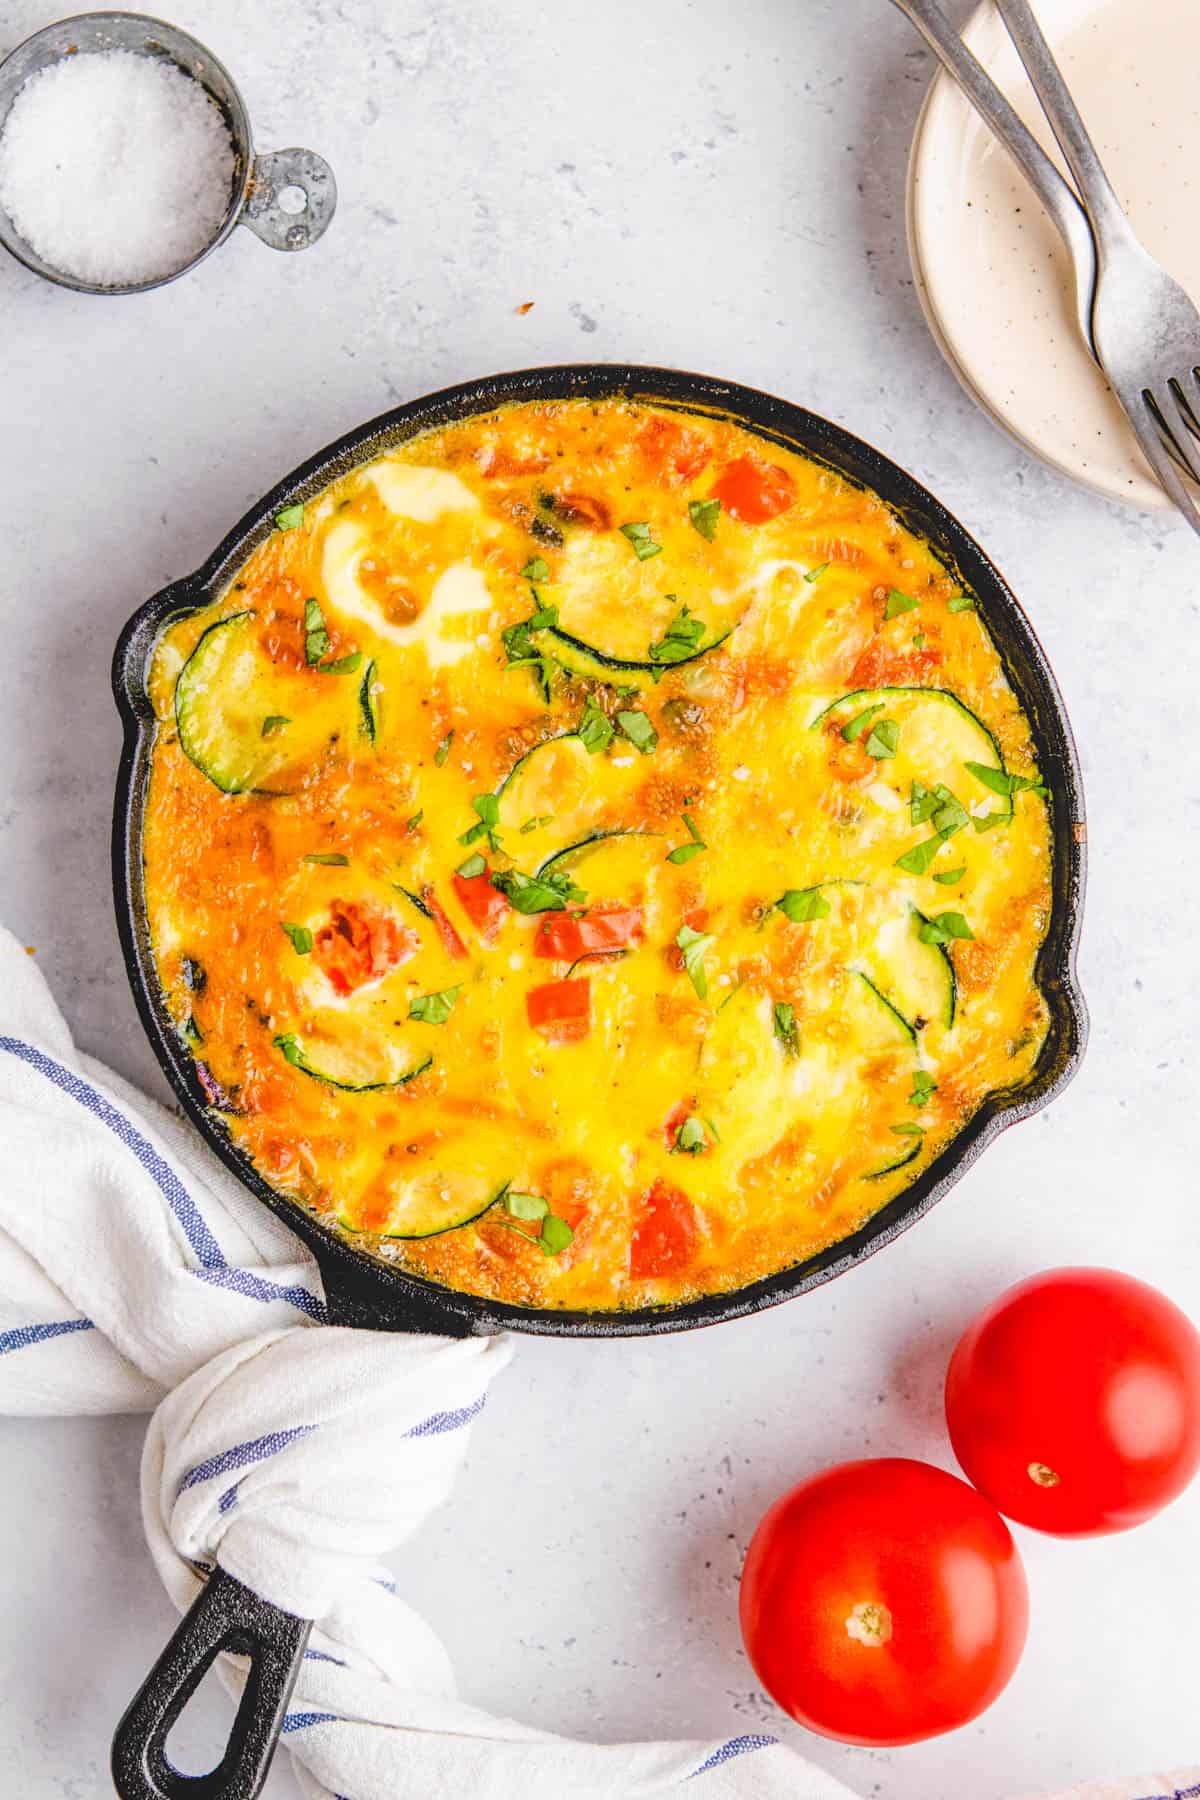 baked easy healthy low fat courgette frittata recipe (low carb vegetable frittata in a pan)